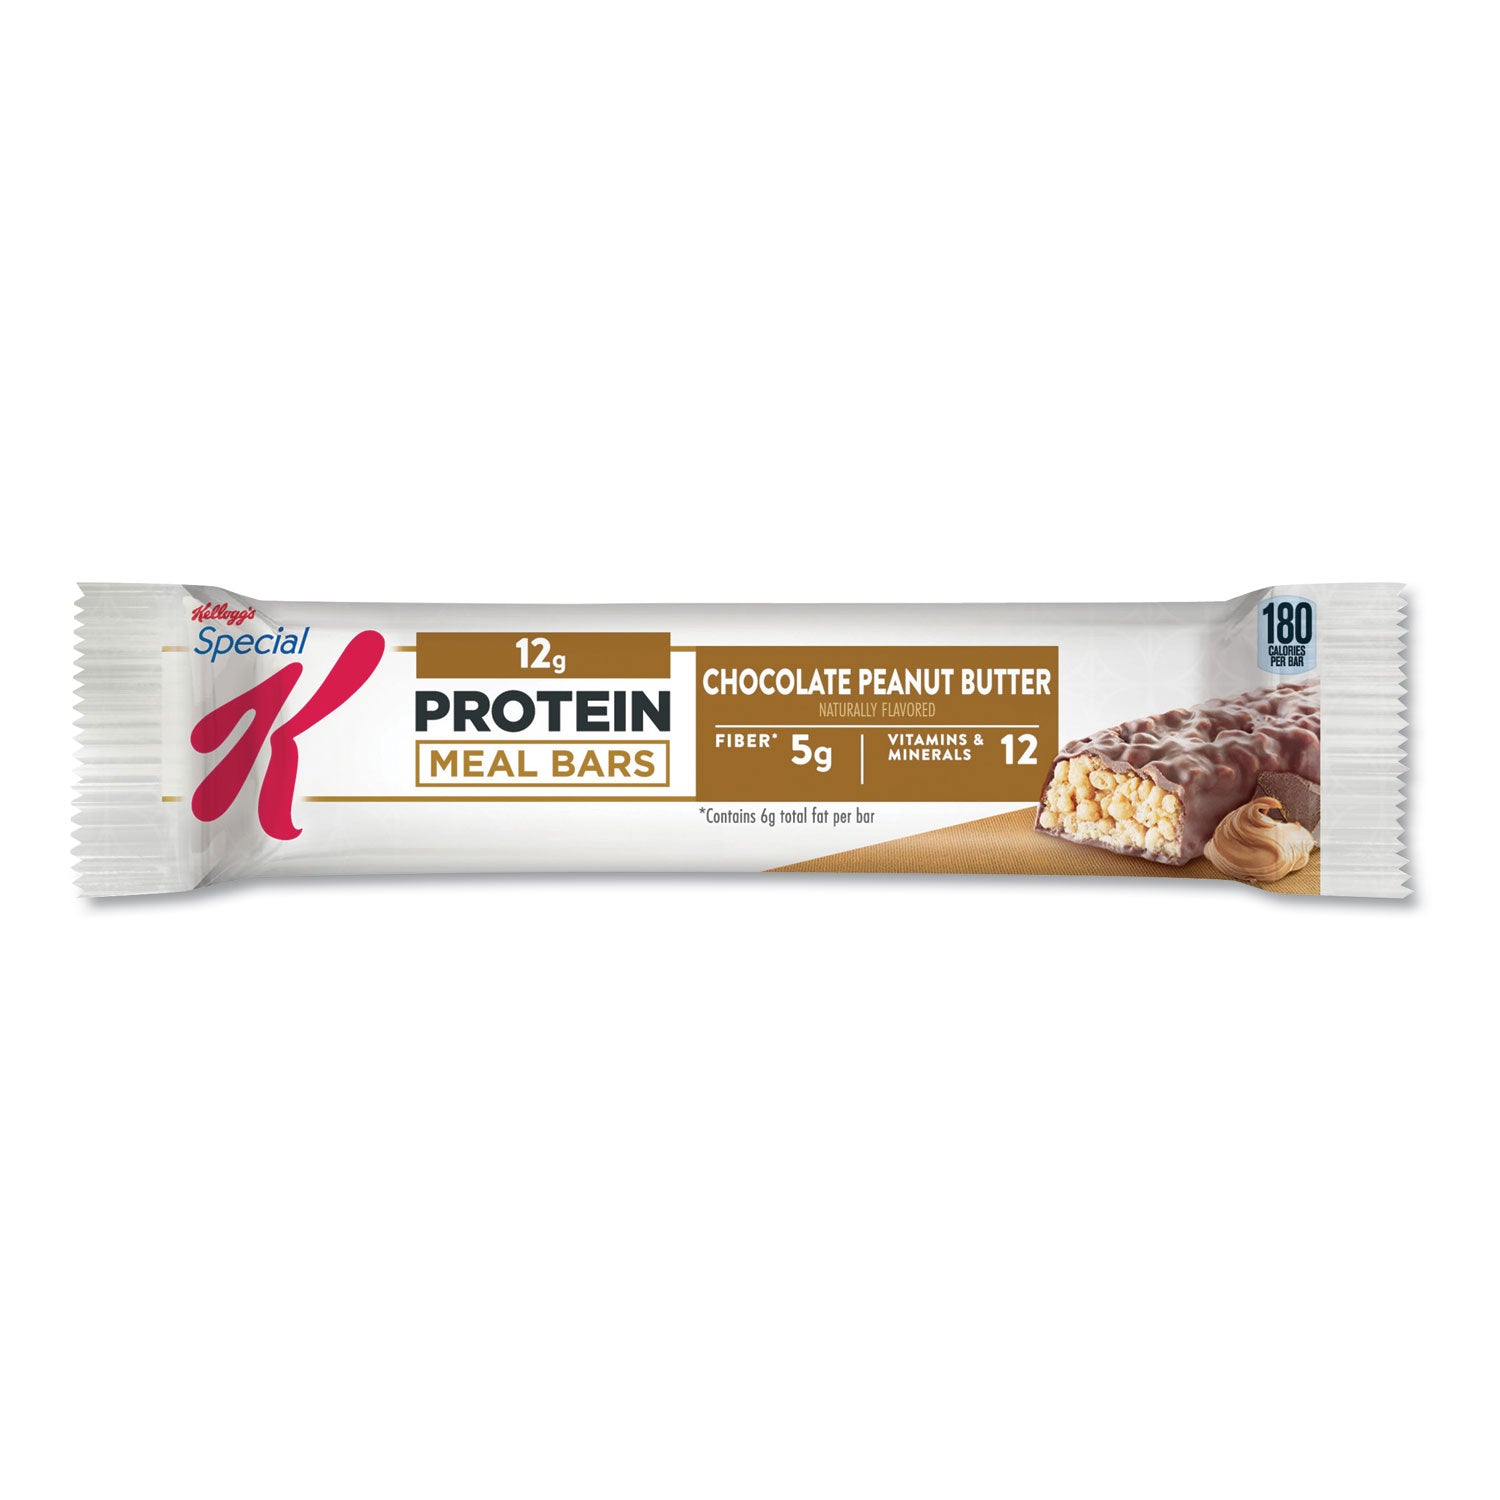 special-k-protein-meal-bar-chocolate-peanut-butter-159-oz-8-box_keb29190 - 1